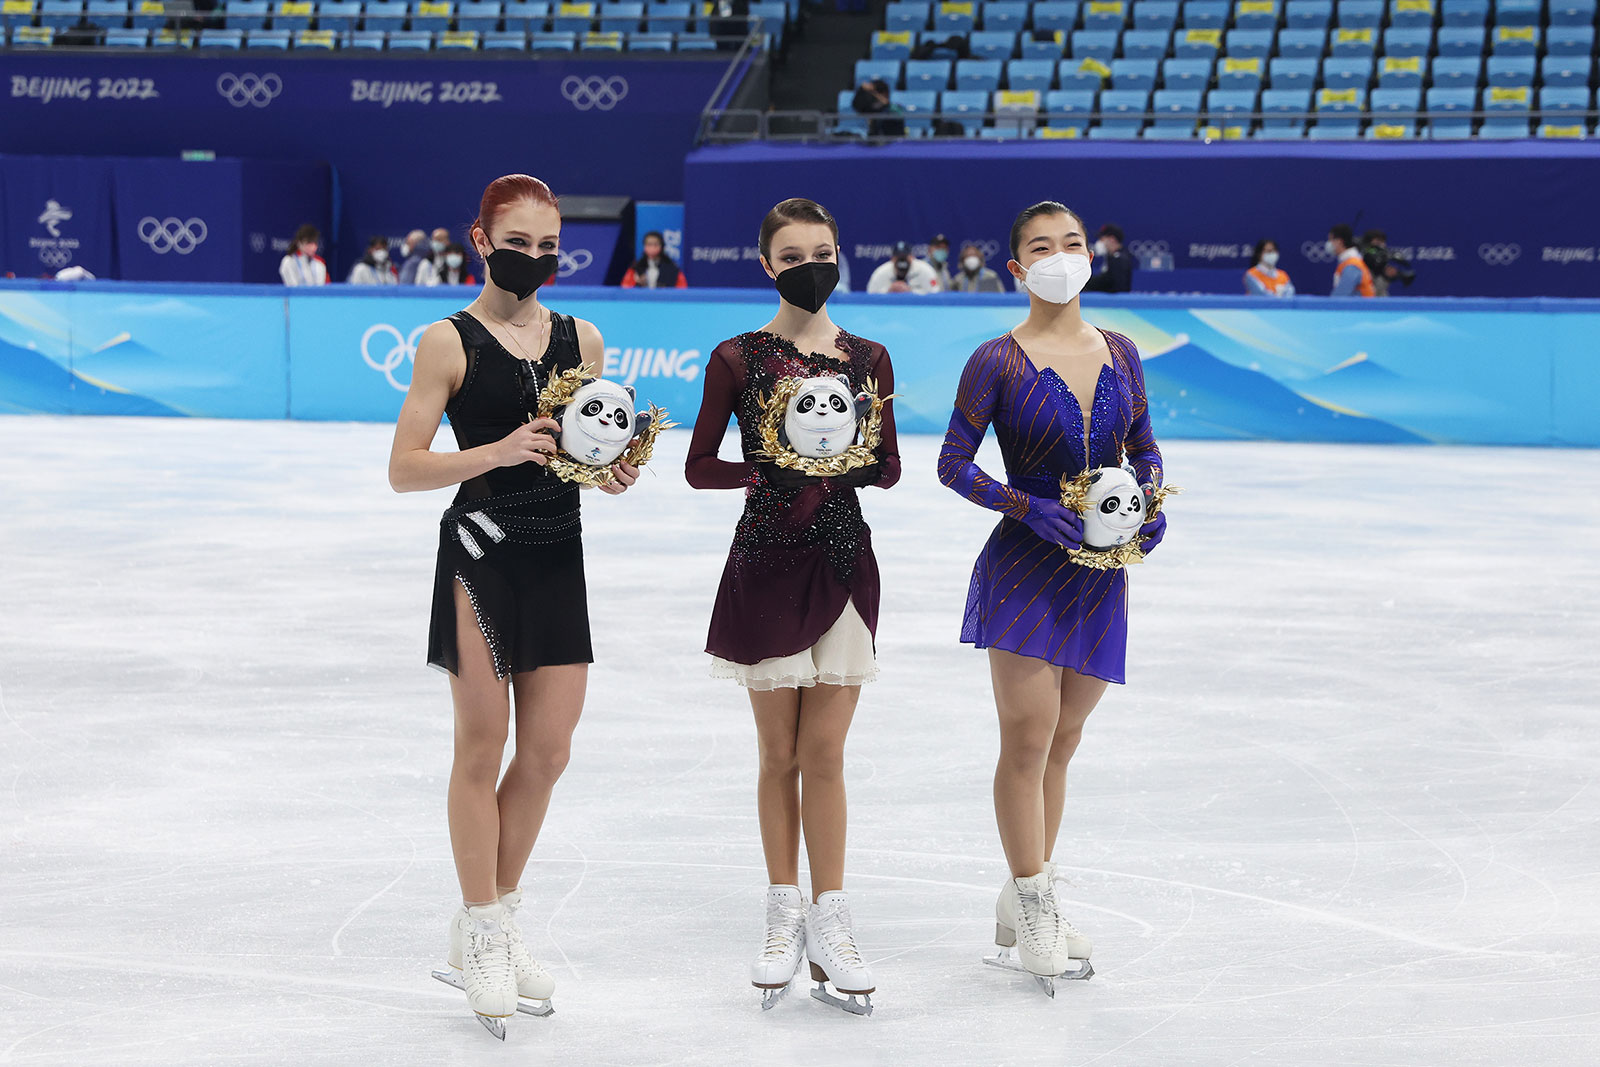 Beijing Winter Olympics: Live news and results on Feb. 17 2022